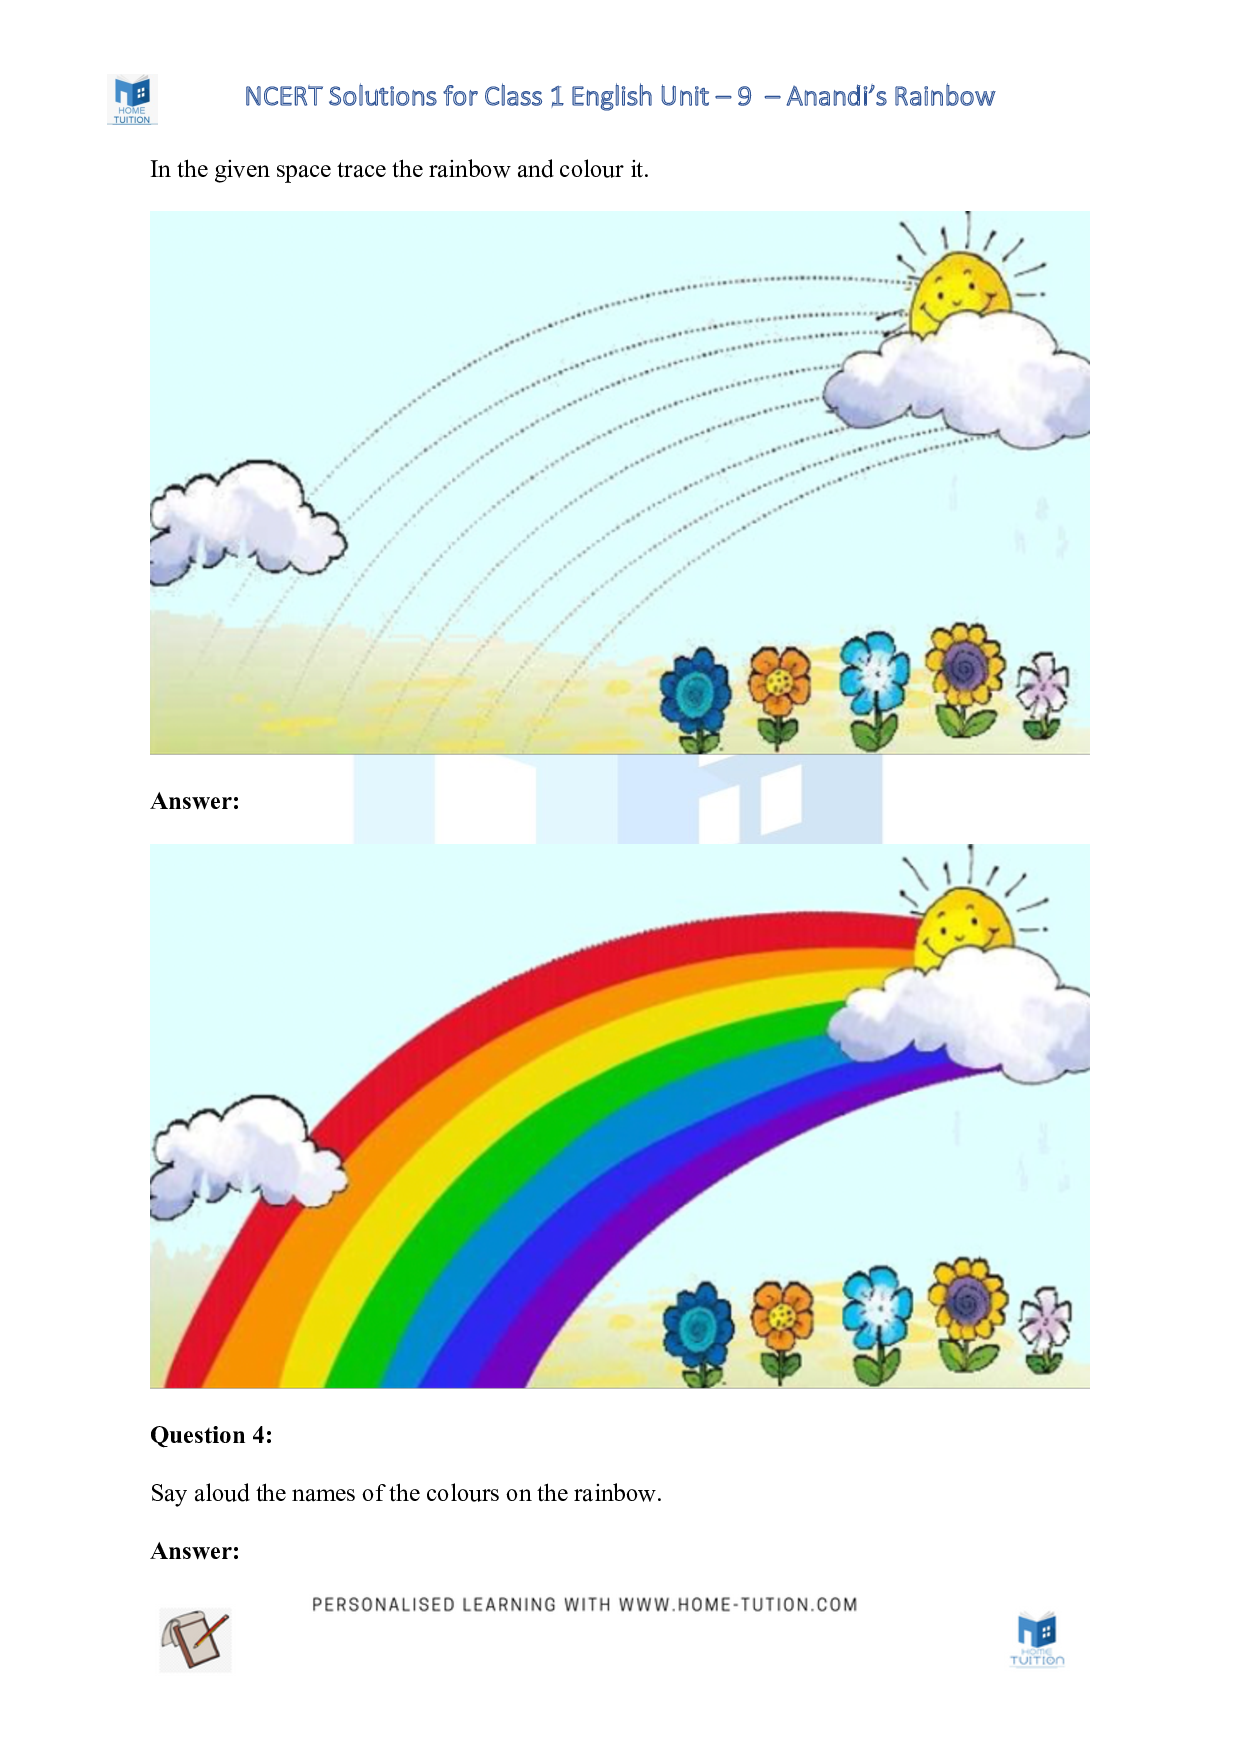 NCERT Solutions for Class 1 English Unit 9 - Anandi's Rainbow